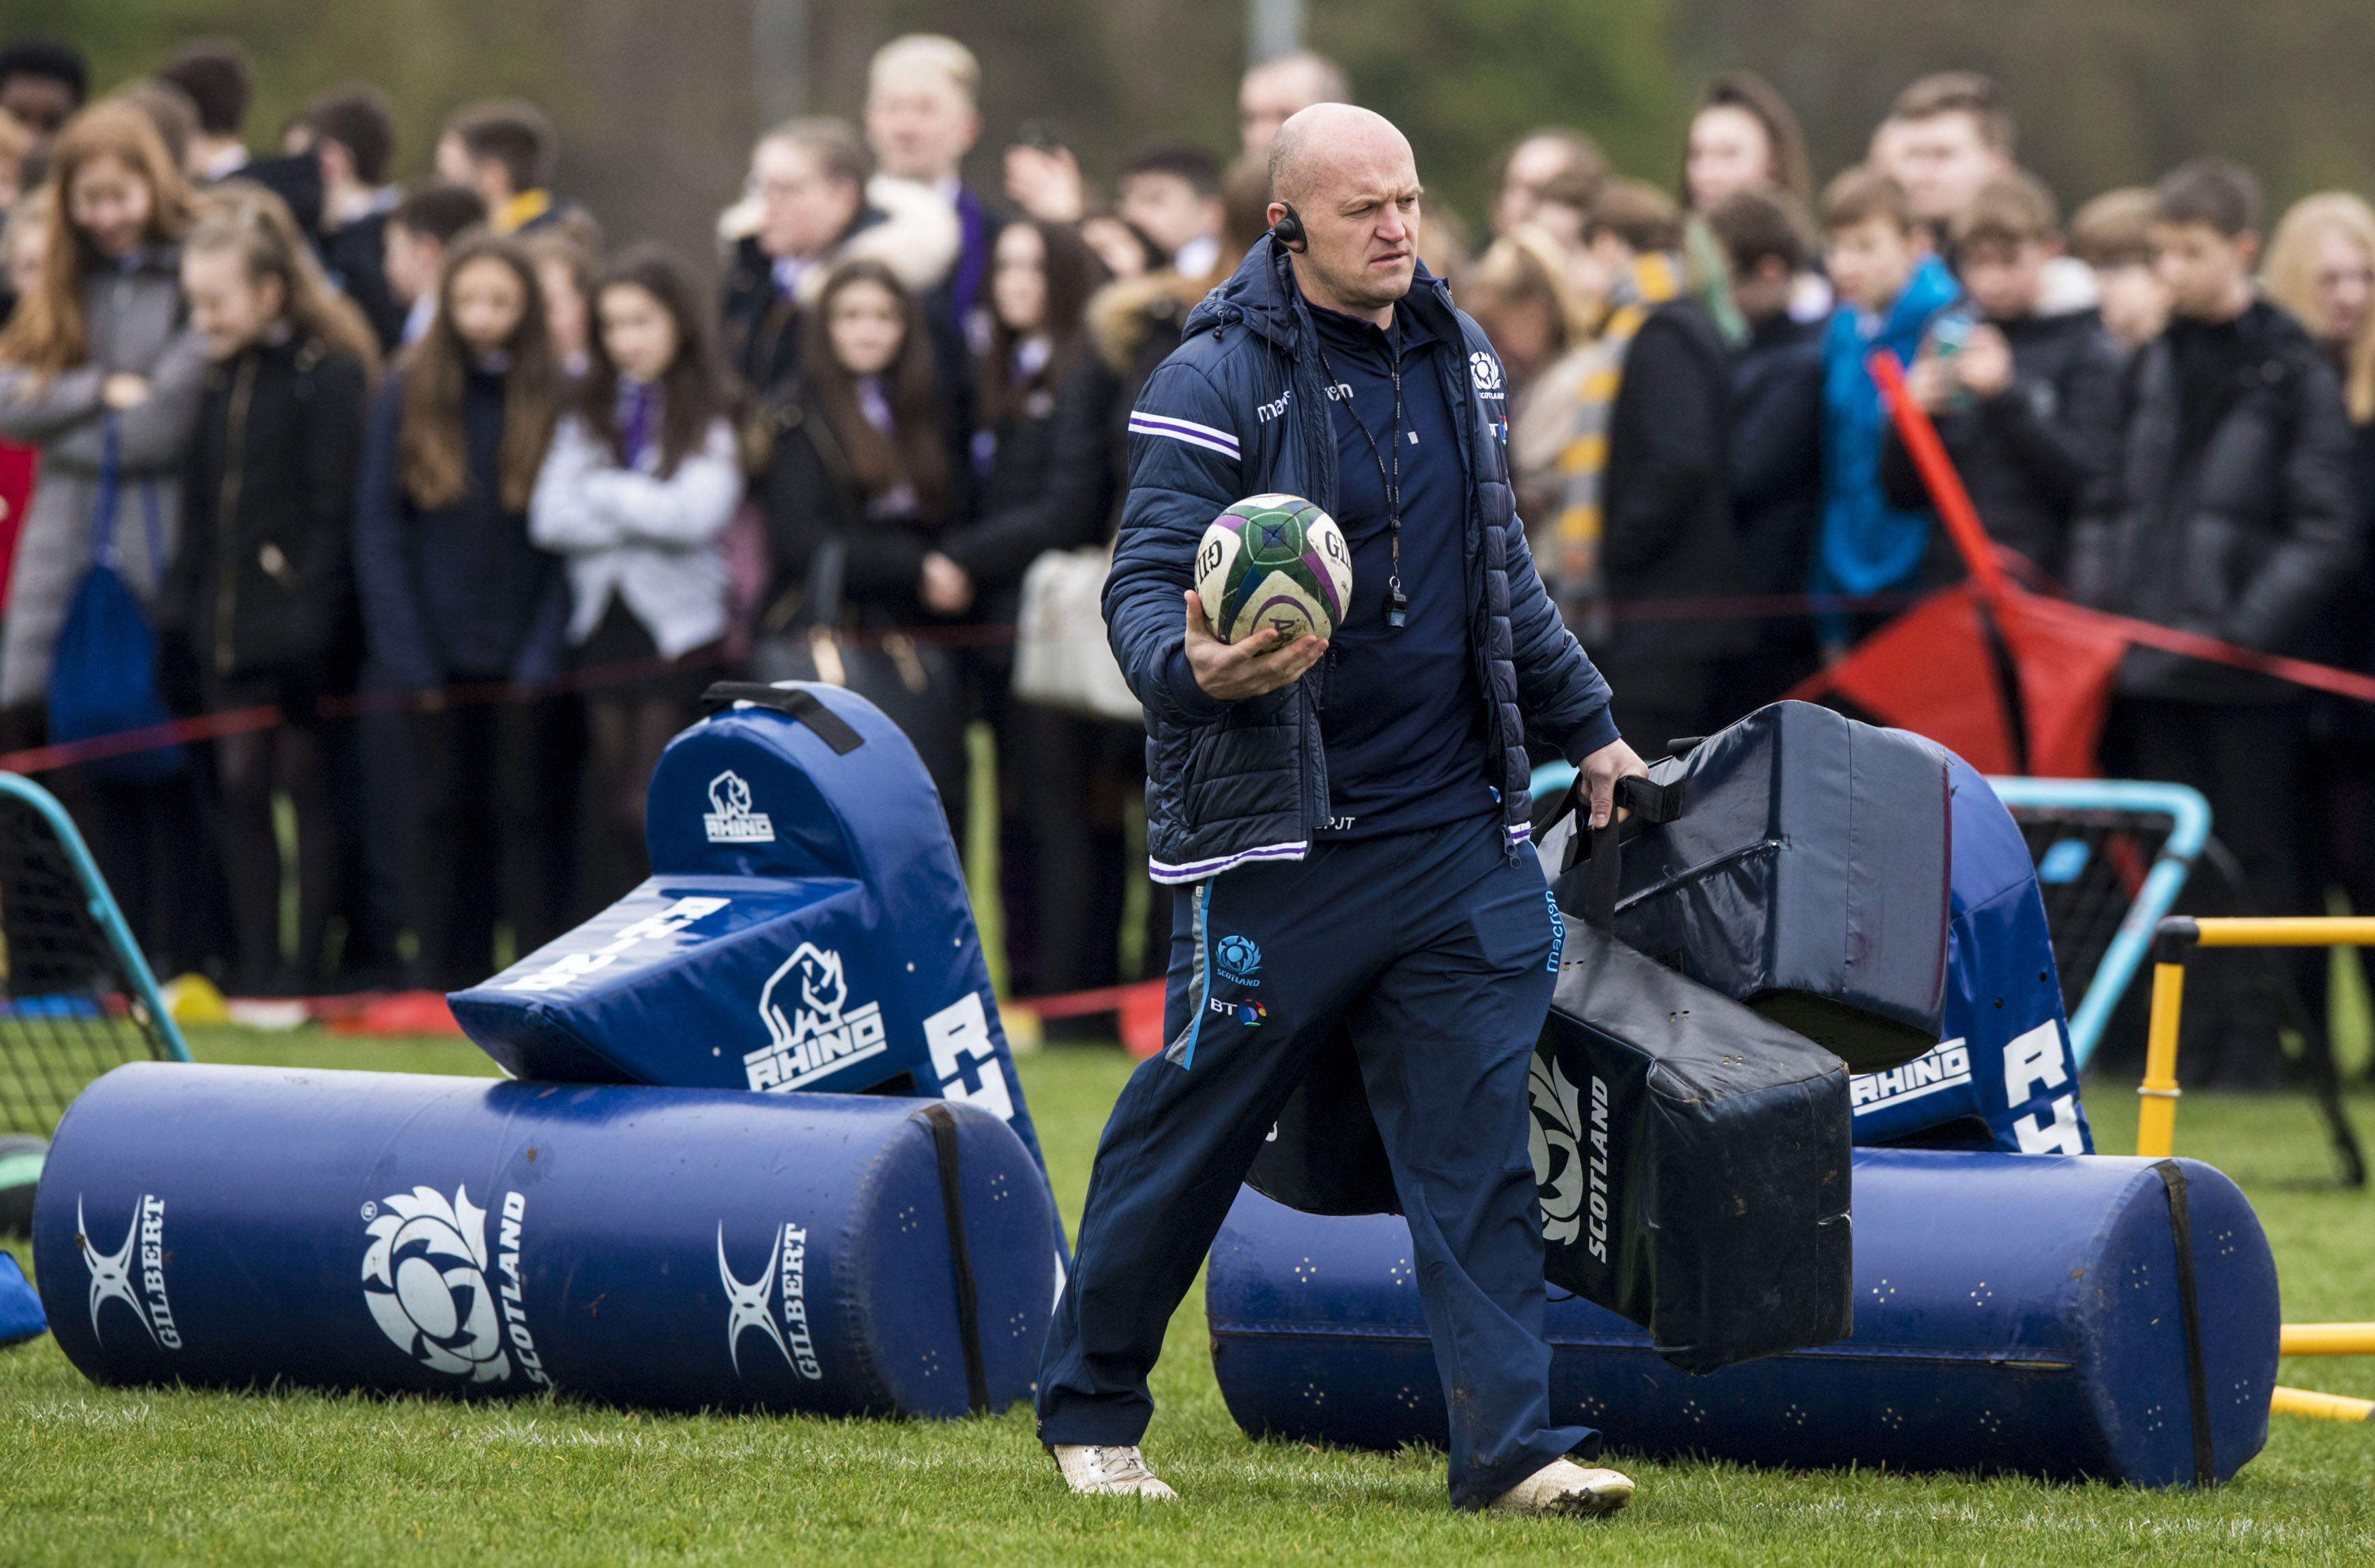 Scotland head coach Gregor Townsend at yesterday's public session at Wallace High in Stirling.